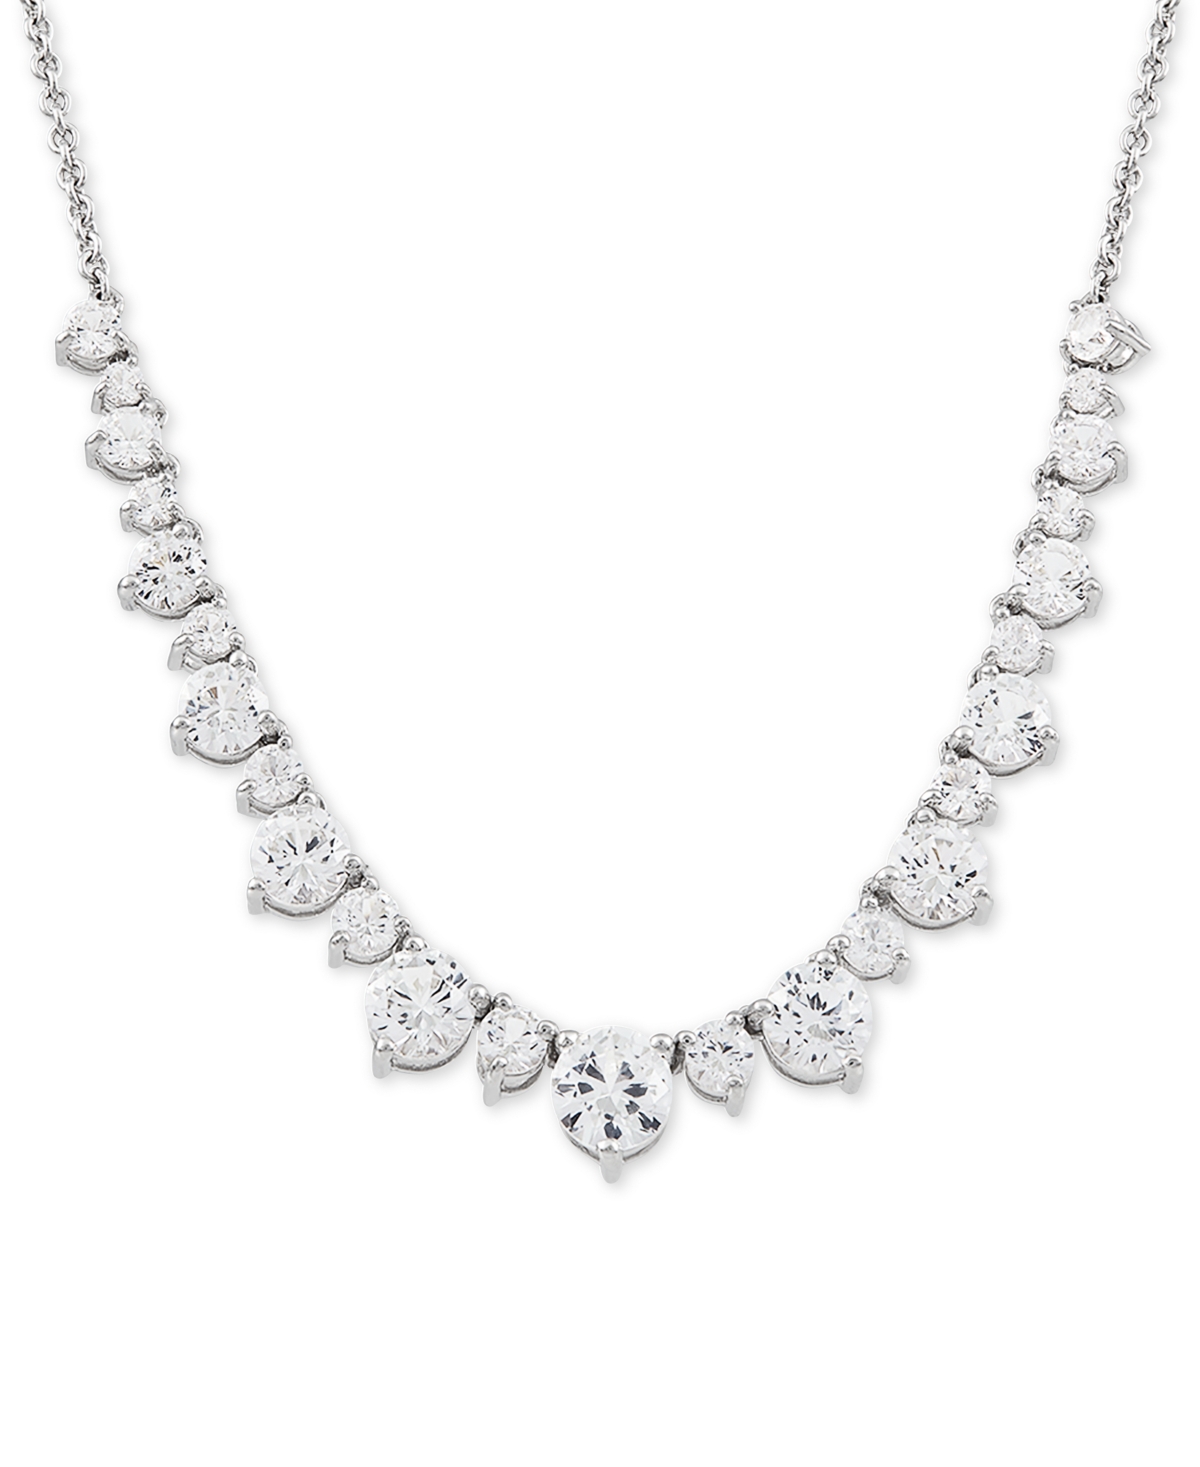 Cubic Zirconia 16" Collar Necklace in Sterling Silver - Sterling Silver